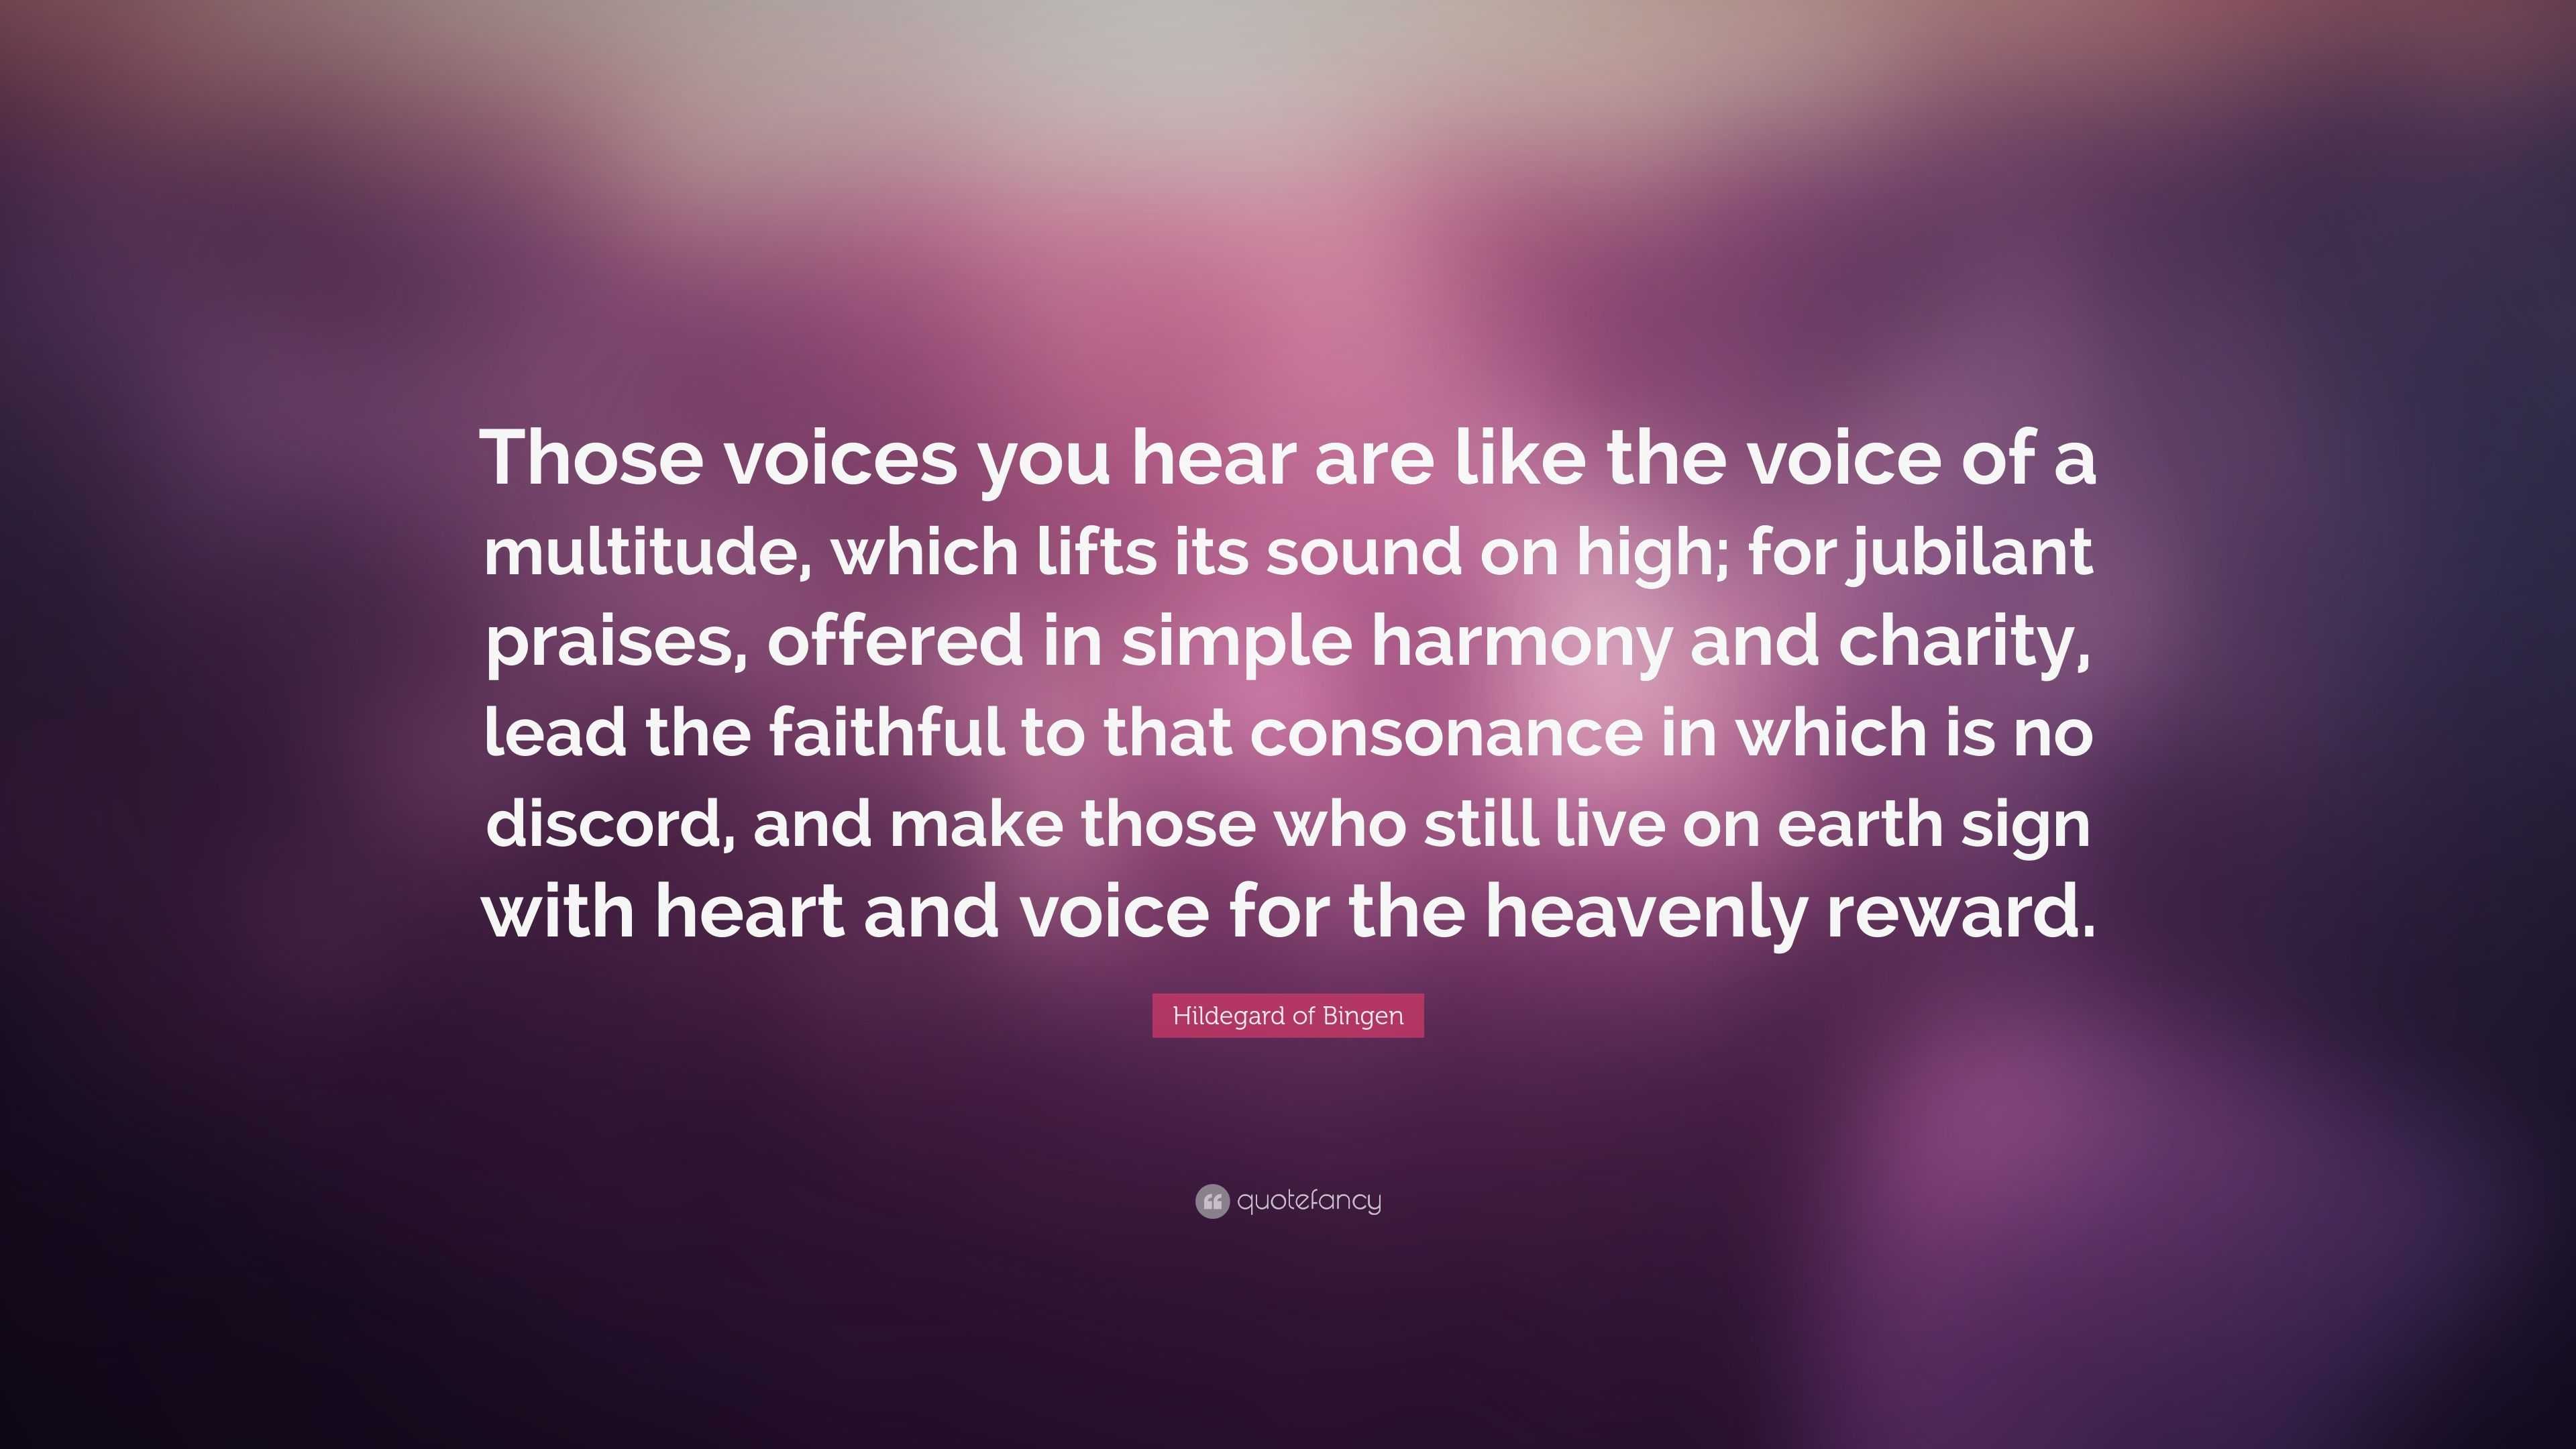 Hildegard of Bingen Quote: "Those voices you hear are like the voice of a multitude, which lifts ...